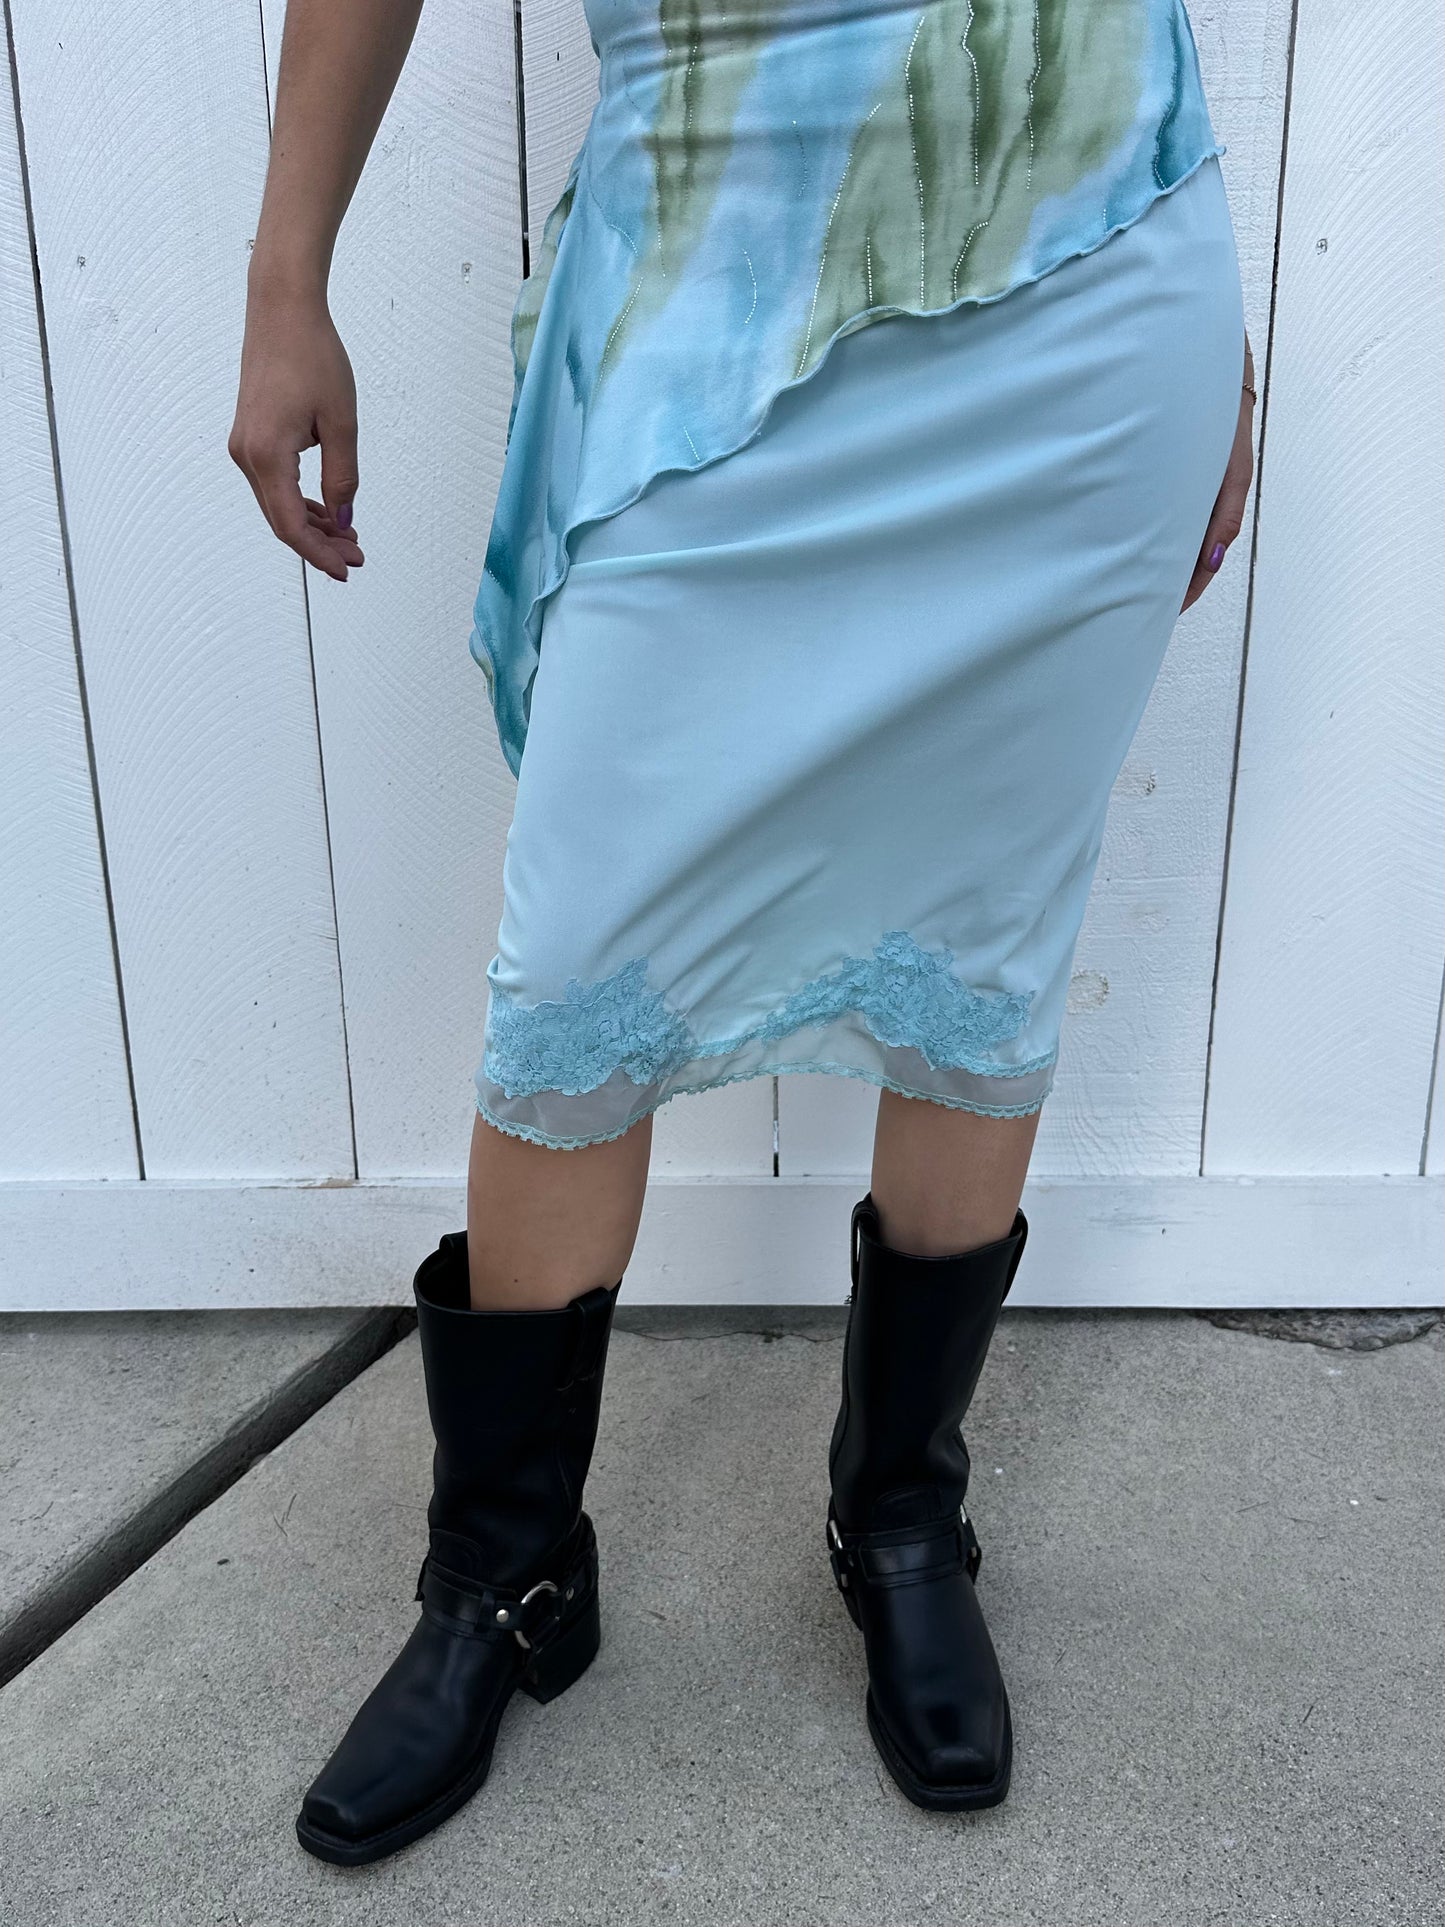 Teal Lace Slip Skirt - XS/S